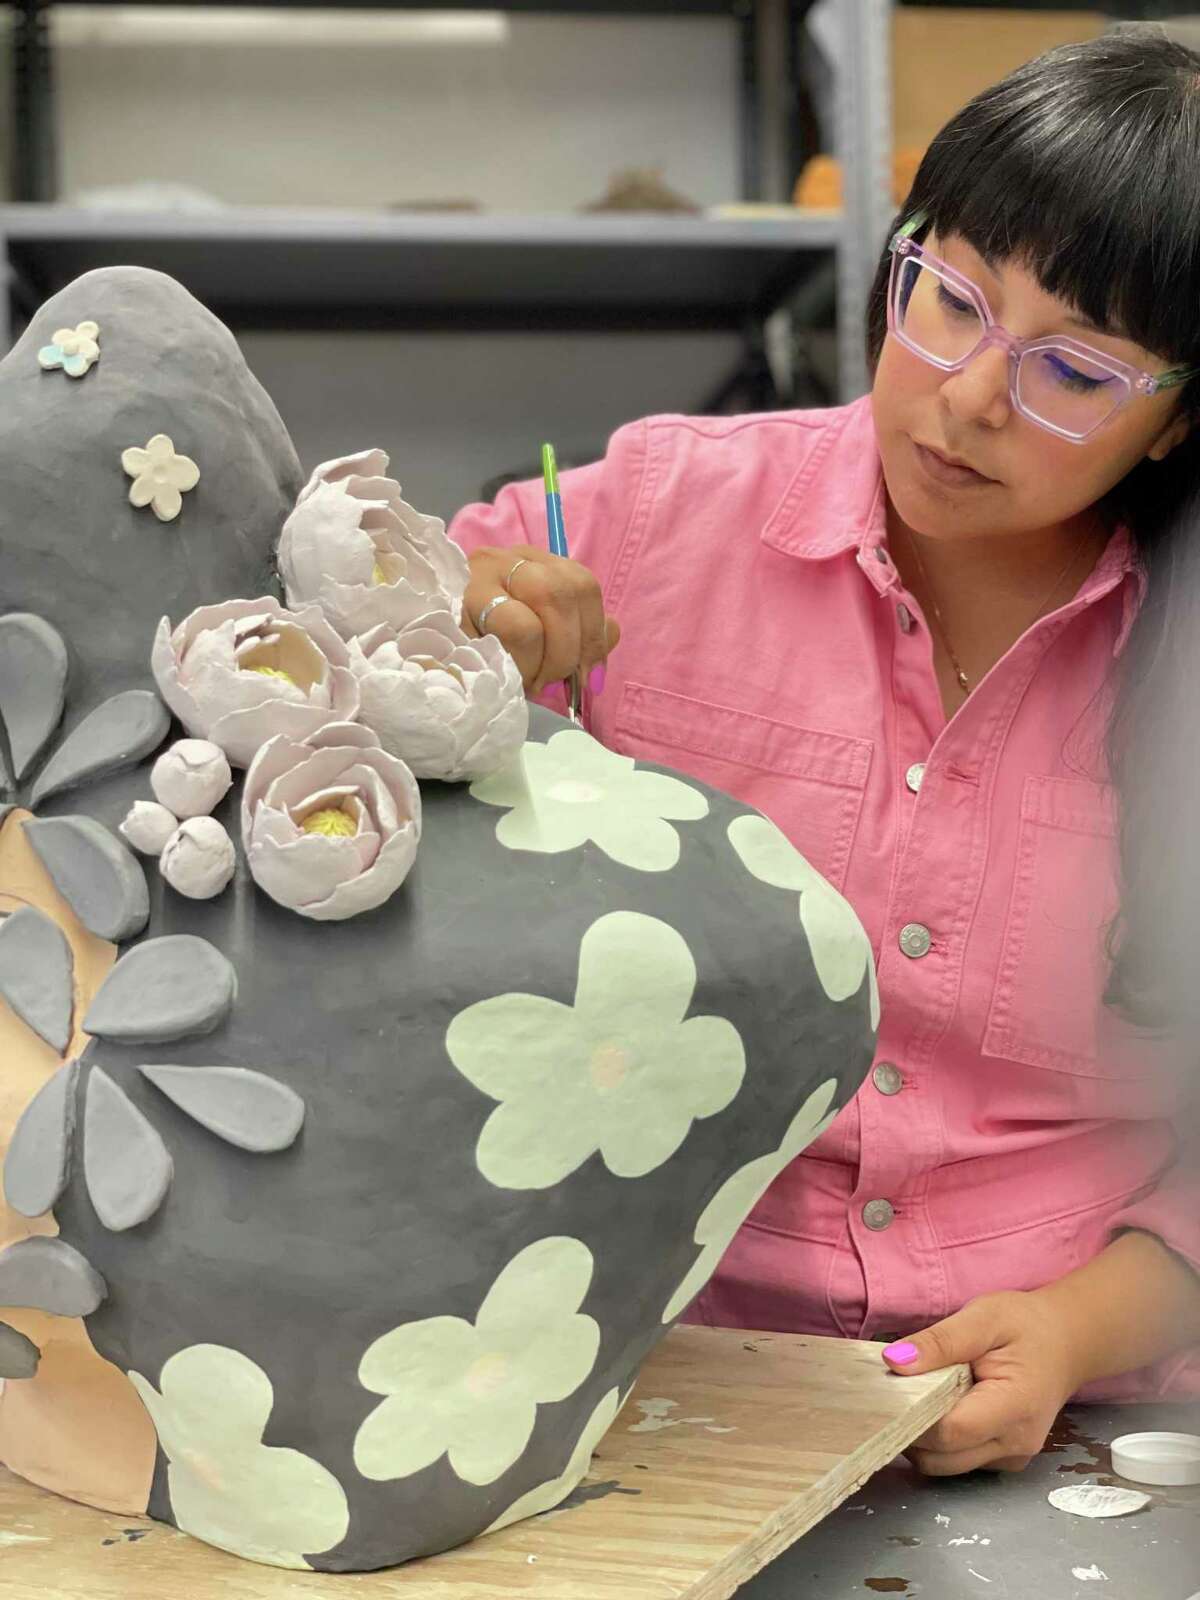 Jasmine Zelaya works on one of her ceramic pieces. Her works are on view at Art League Houston in her solo show “Sad Girls.”